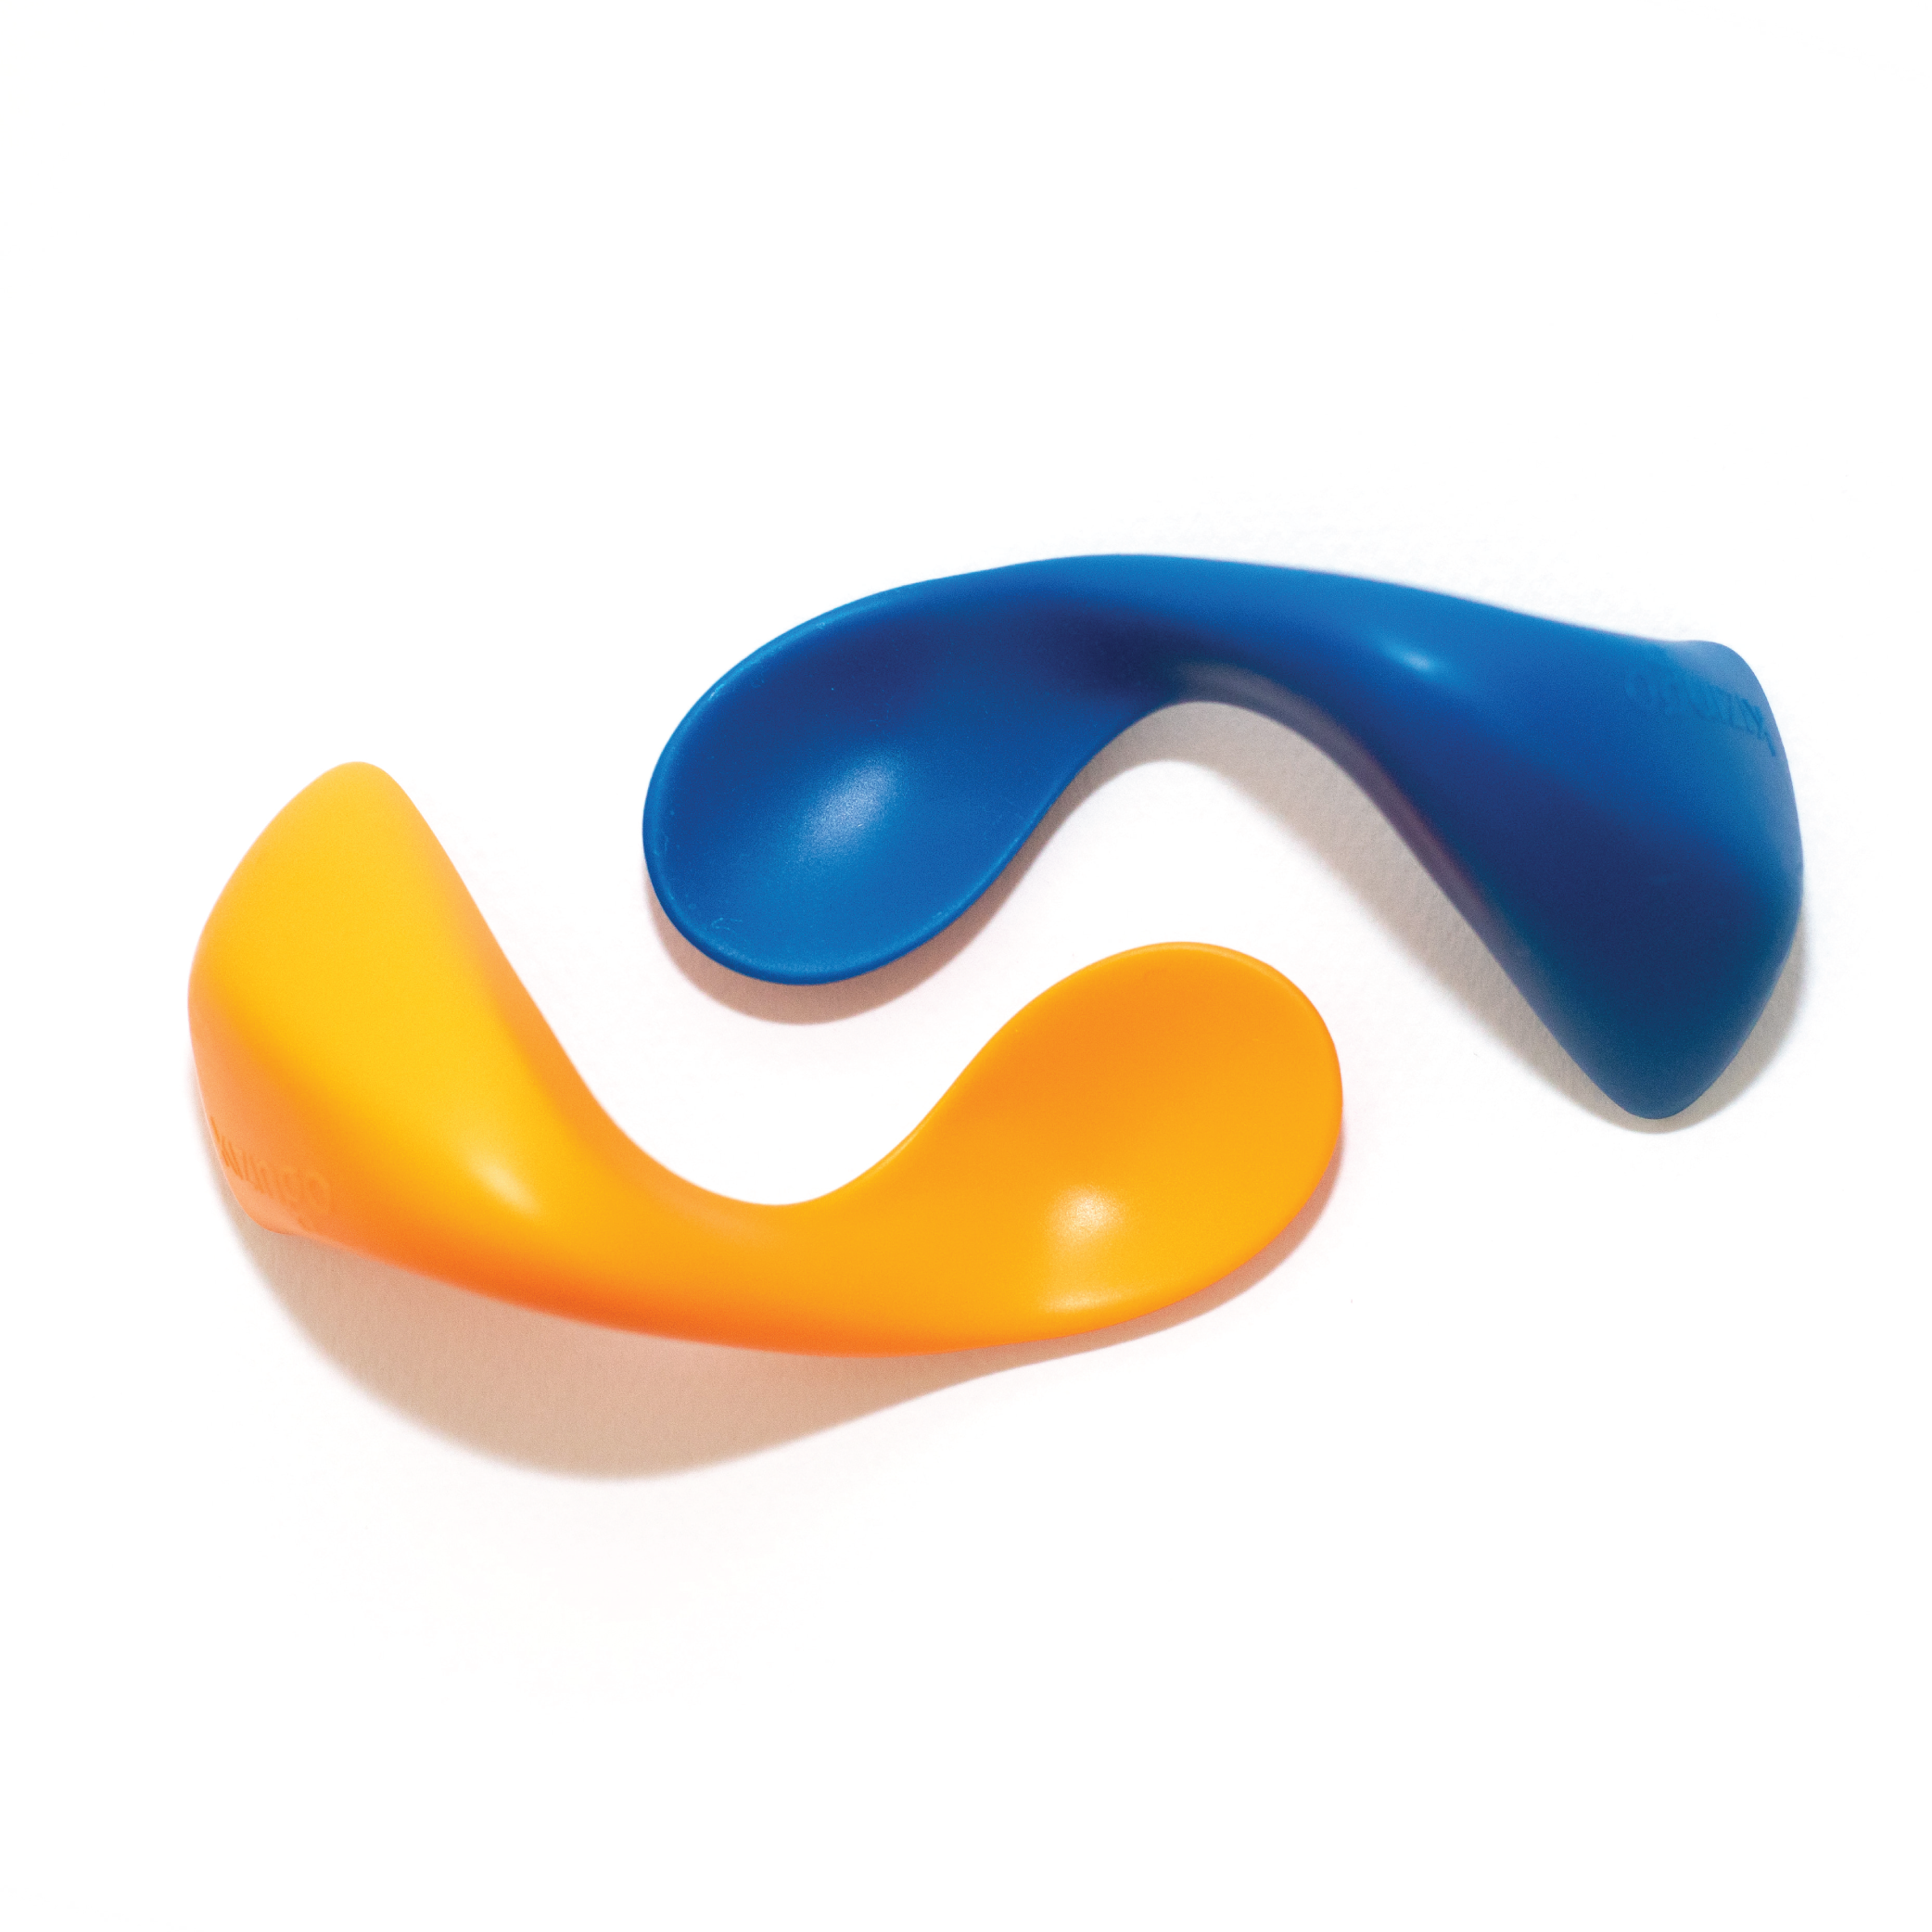 Right-Handed Toddler Spoon Twin Pack - Wave & Mango